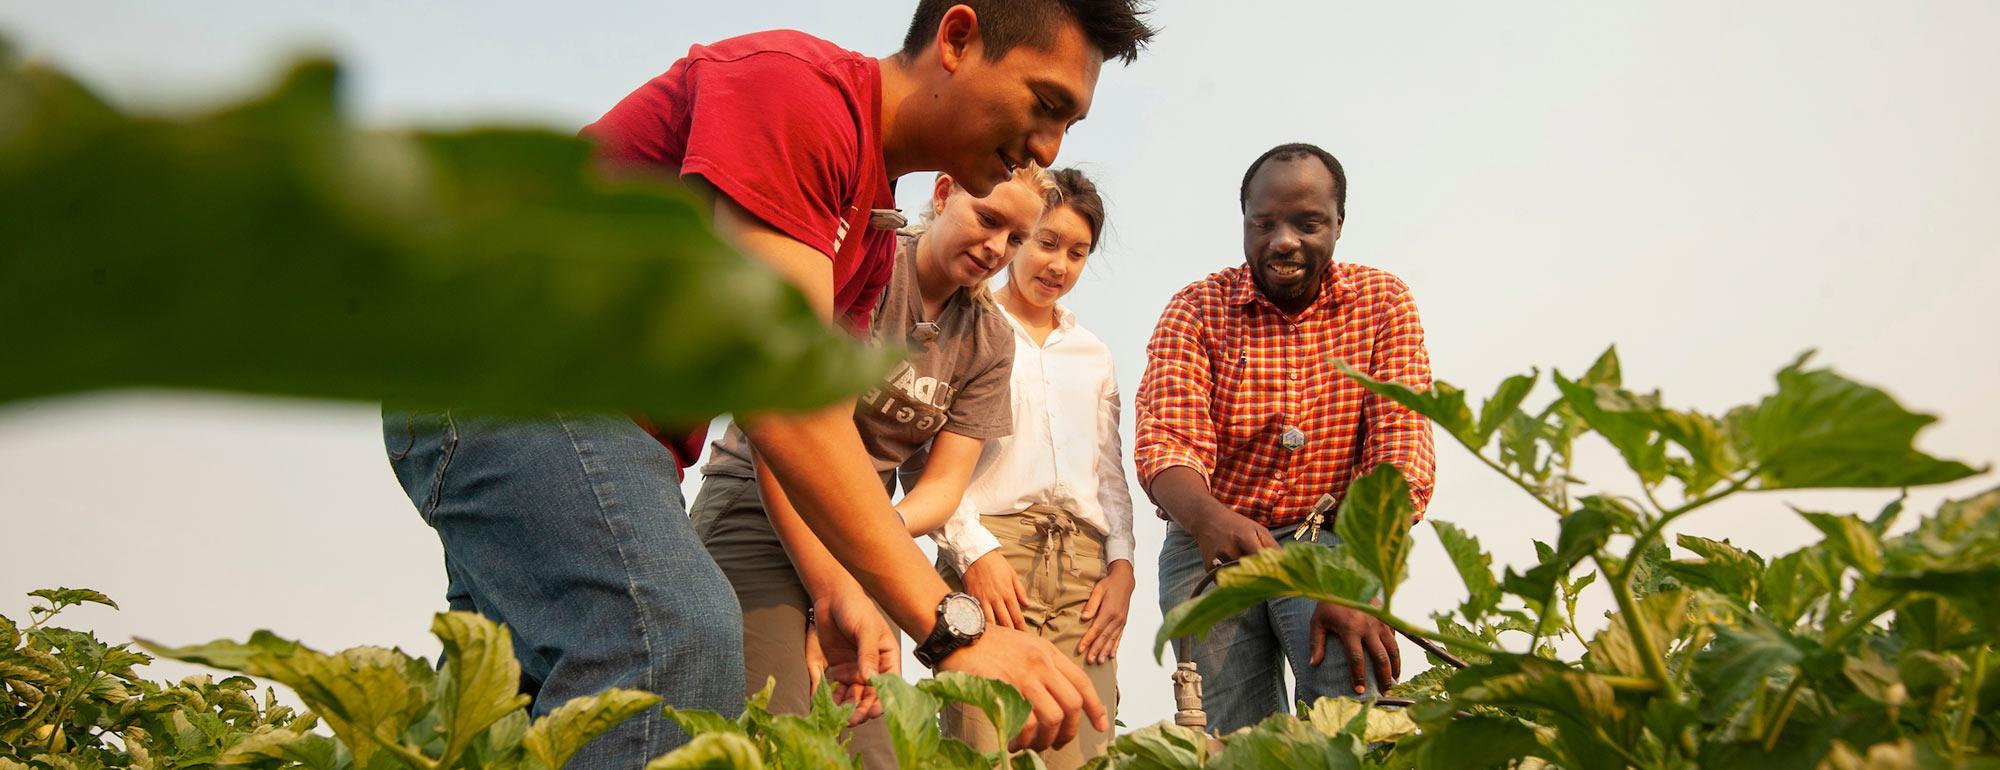 A professor gathers students to inspect crops